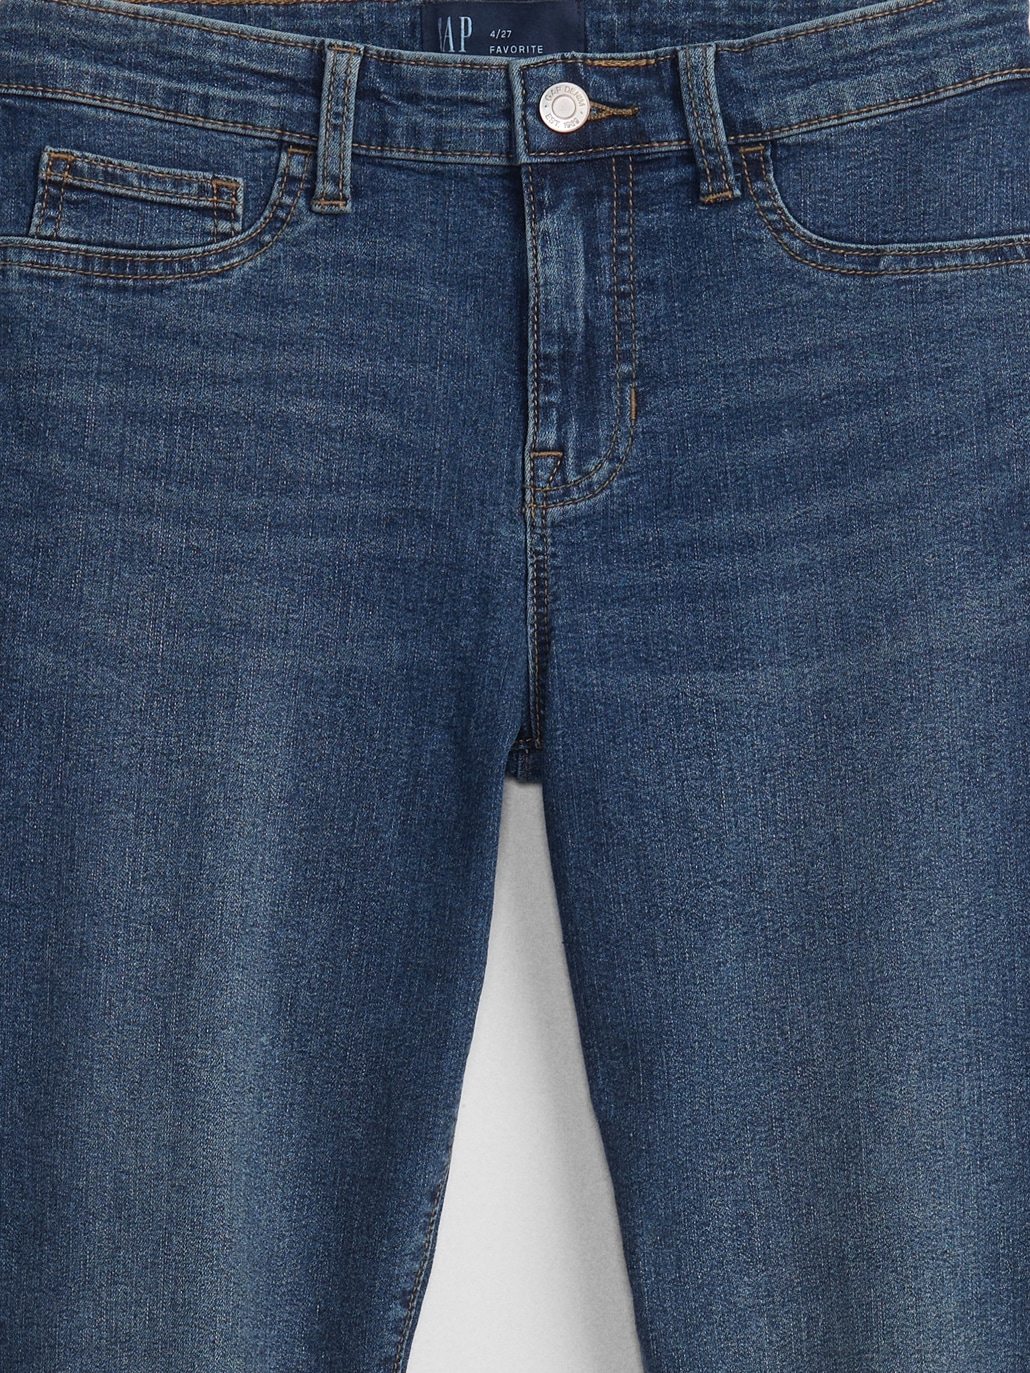 H&M Embrace High Ankle Jeans Women size 4